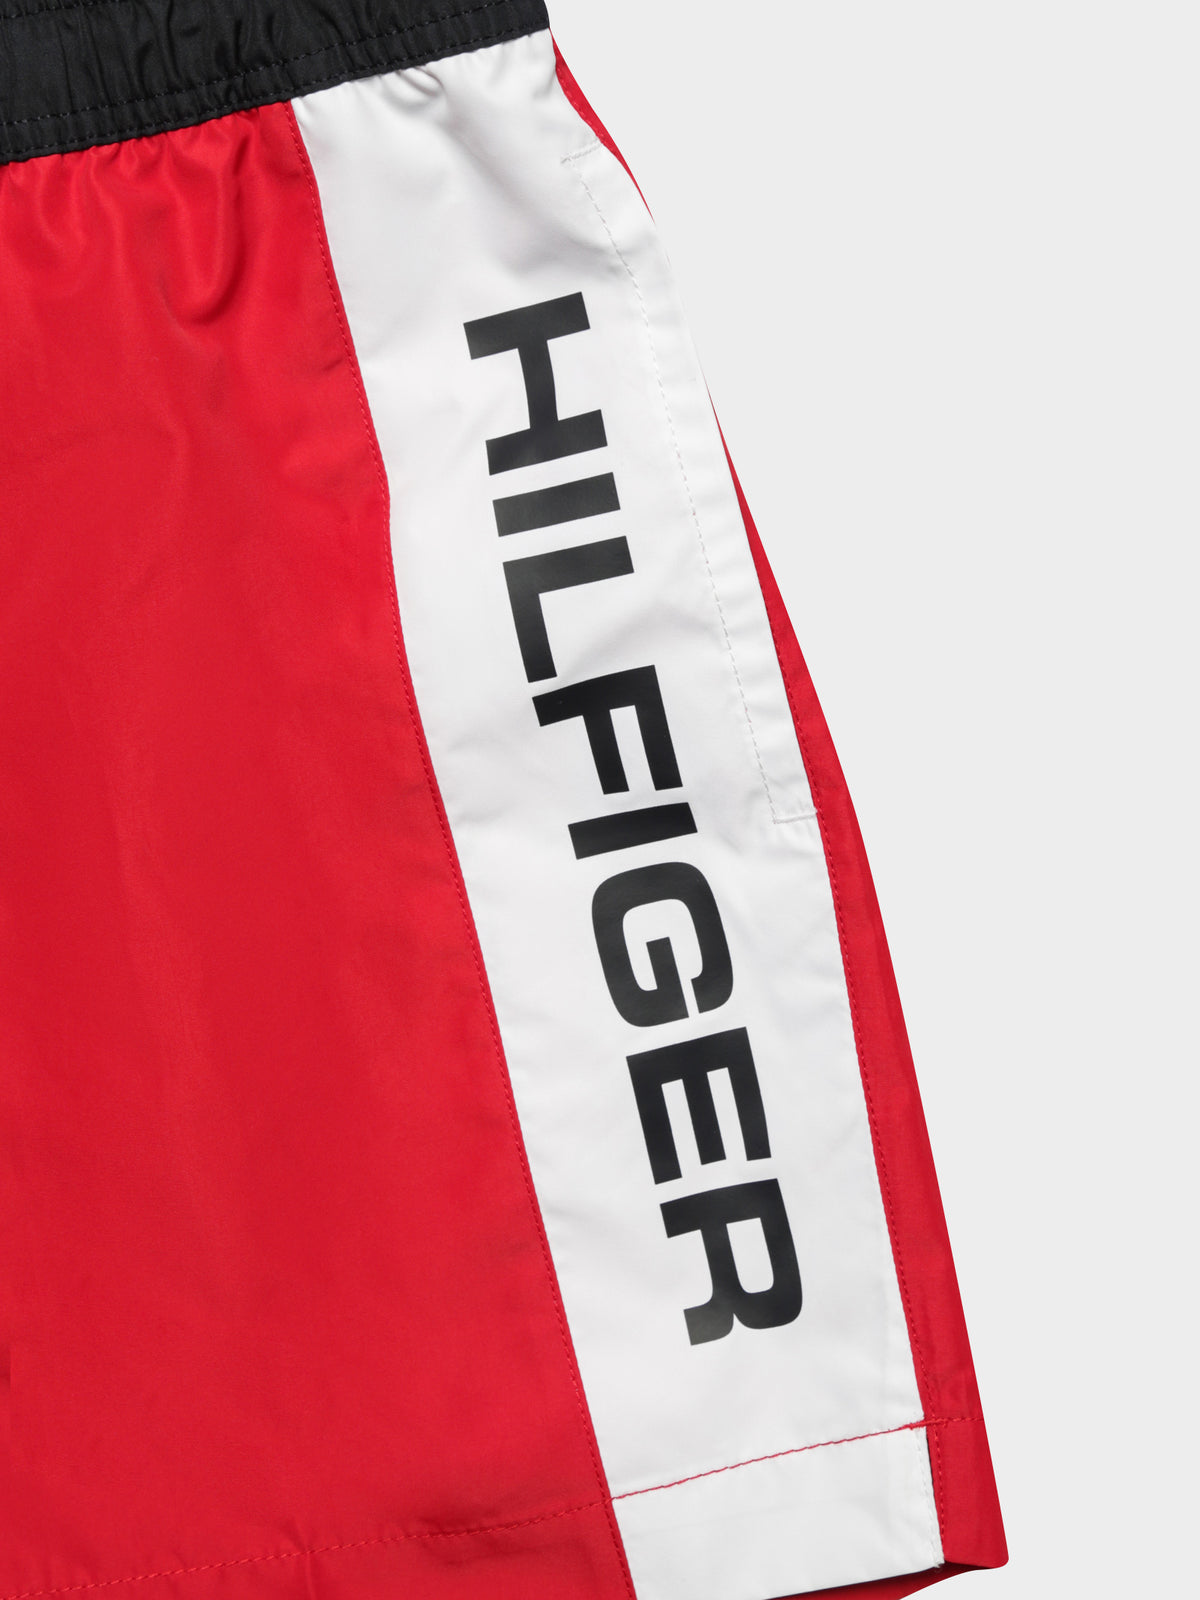 Logo Drawcord Swim Shorts in Primary Red